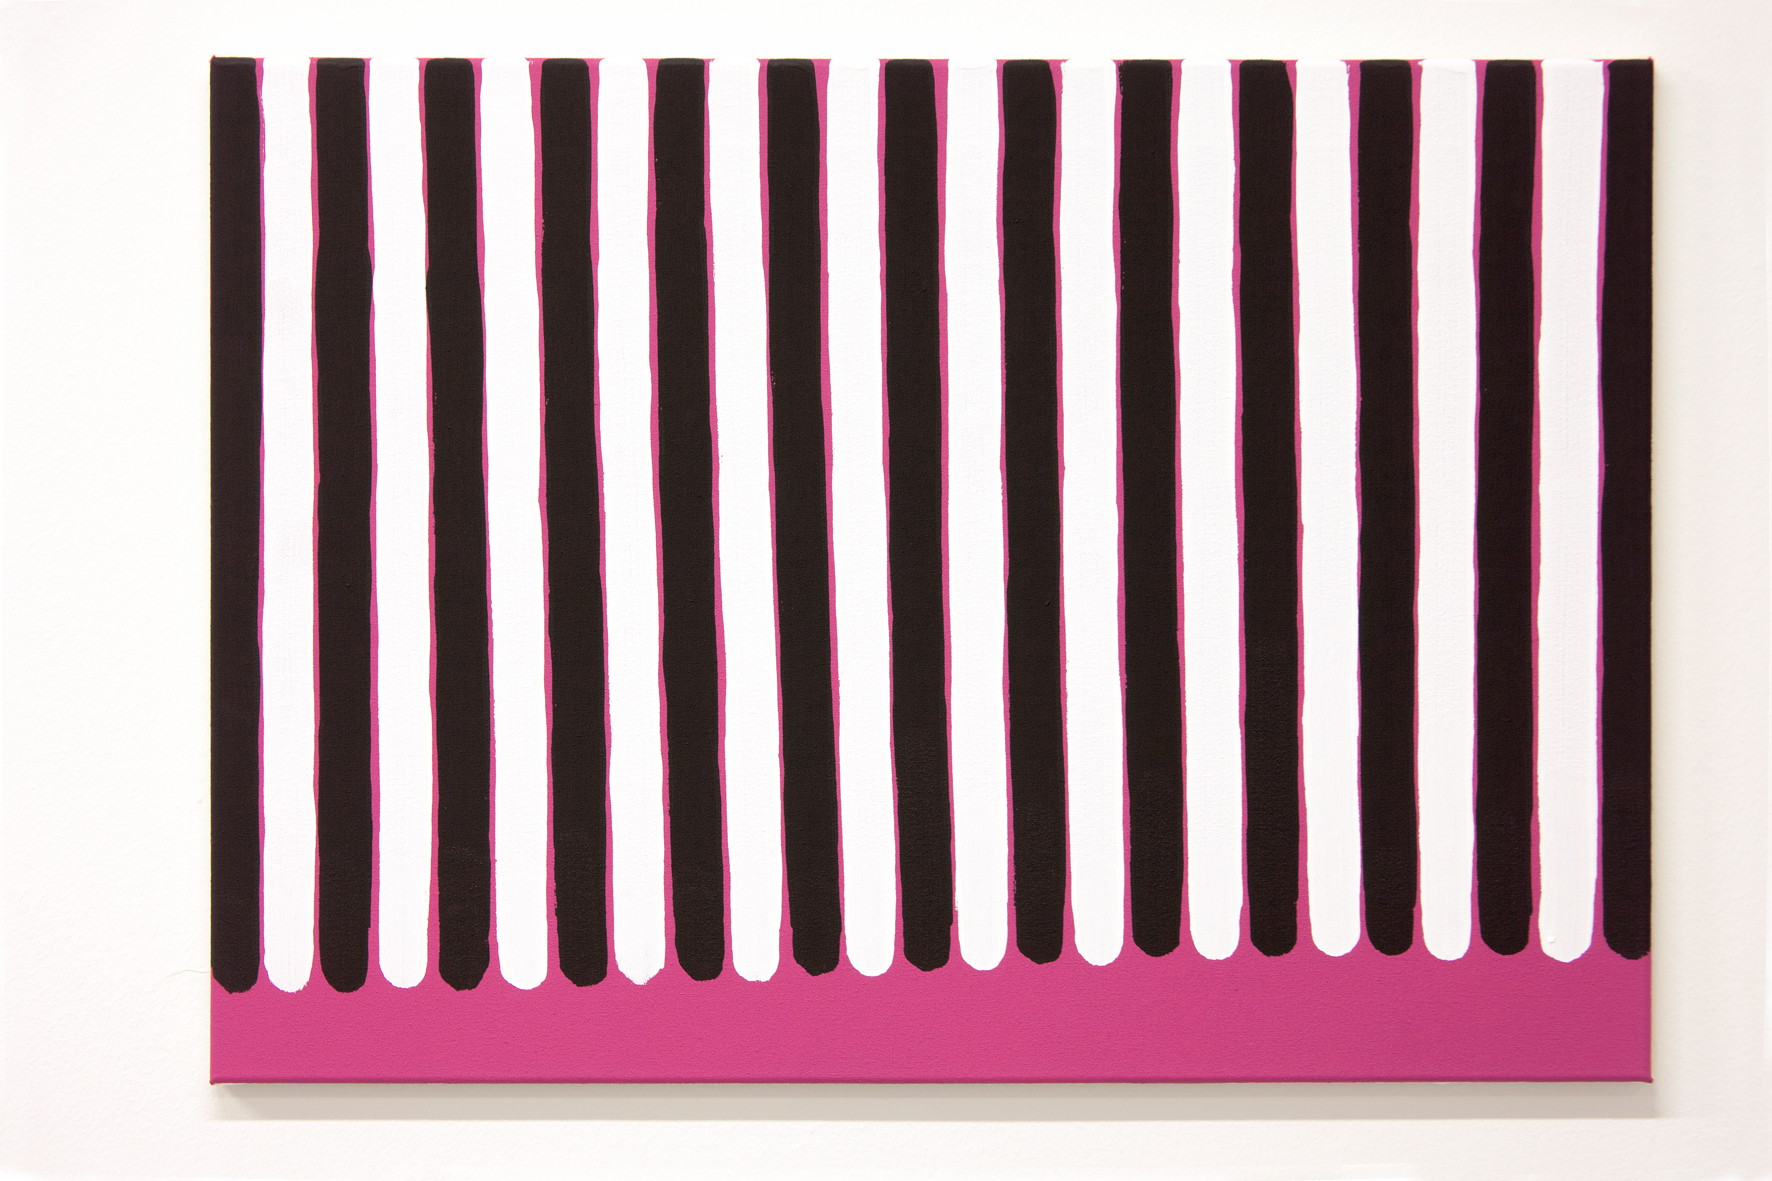 Holger Endres, 01 Magenta Schwarz Weiss (Tag 3), 2012, acrylic on cotton, 50 x 70 cm